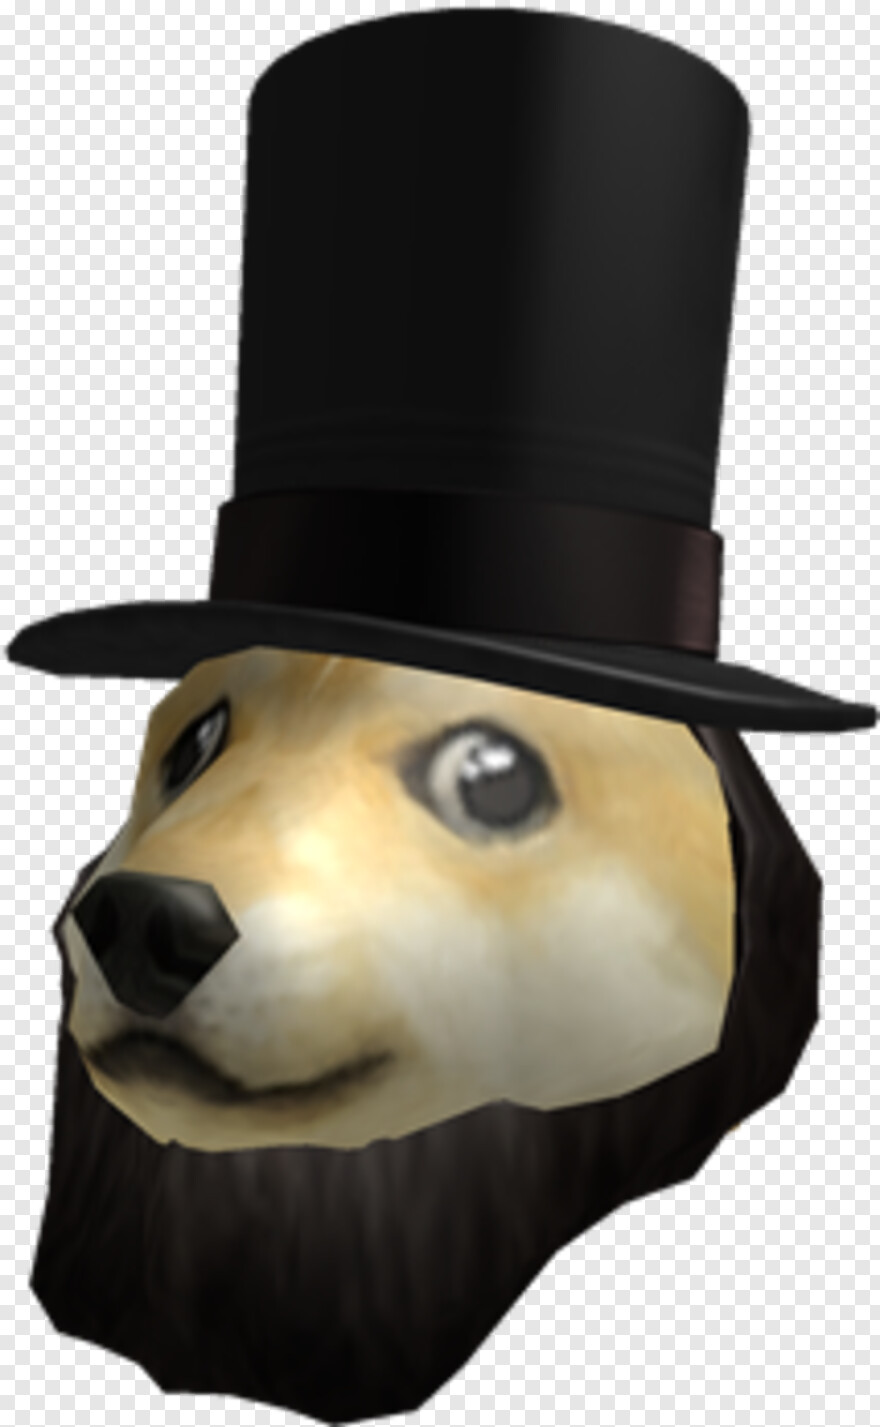 Doge Free Icon Library - roblox doge t shirt